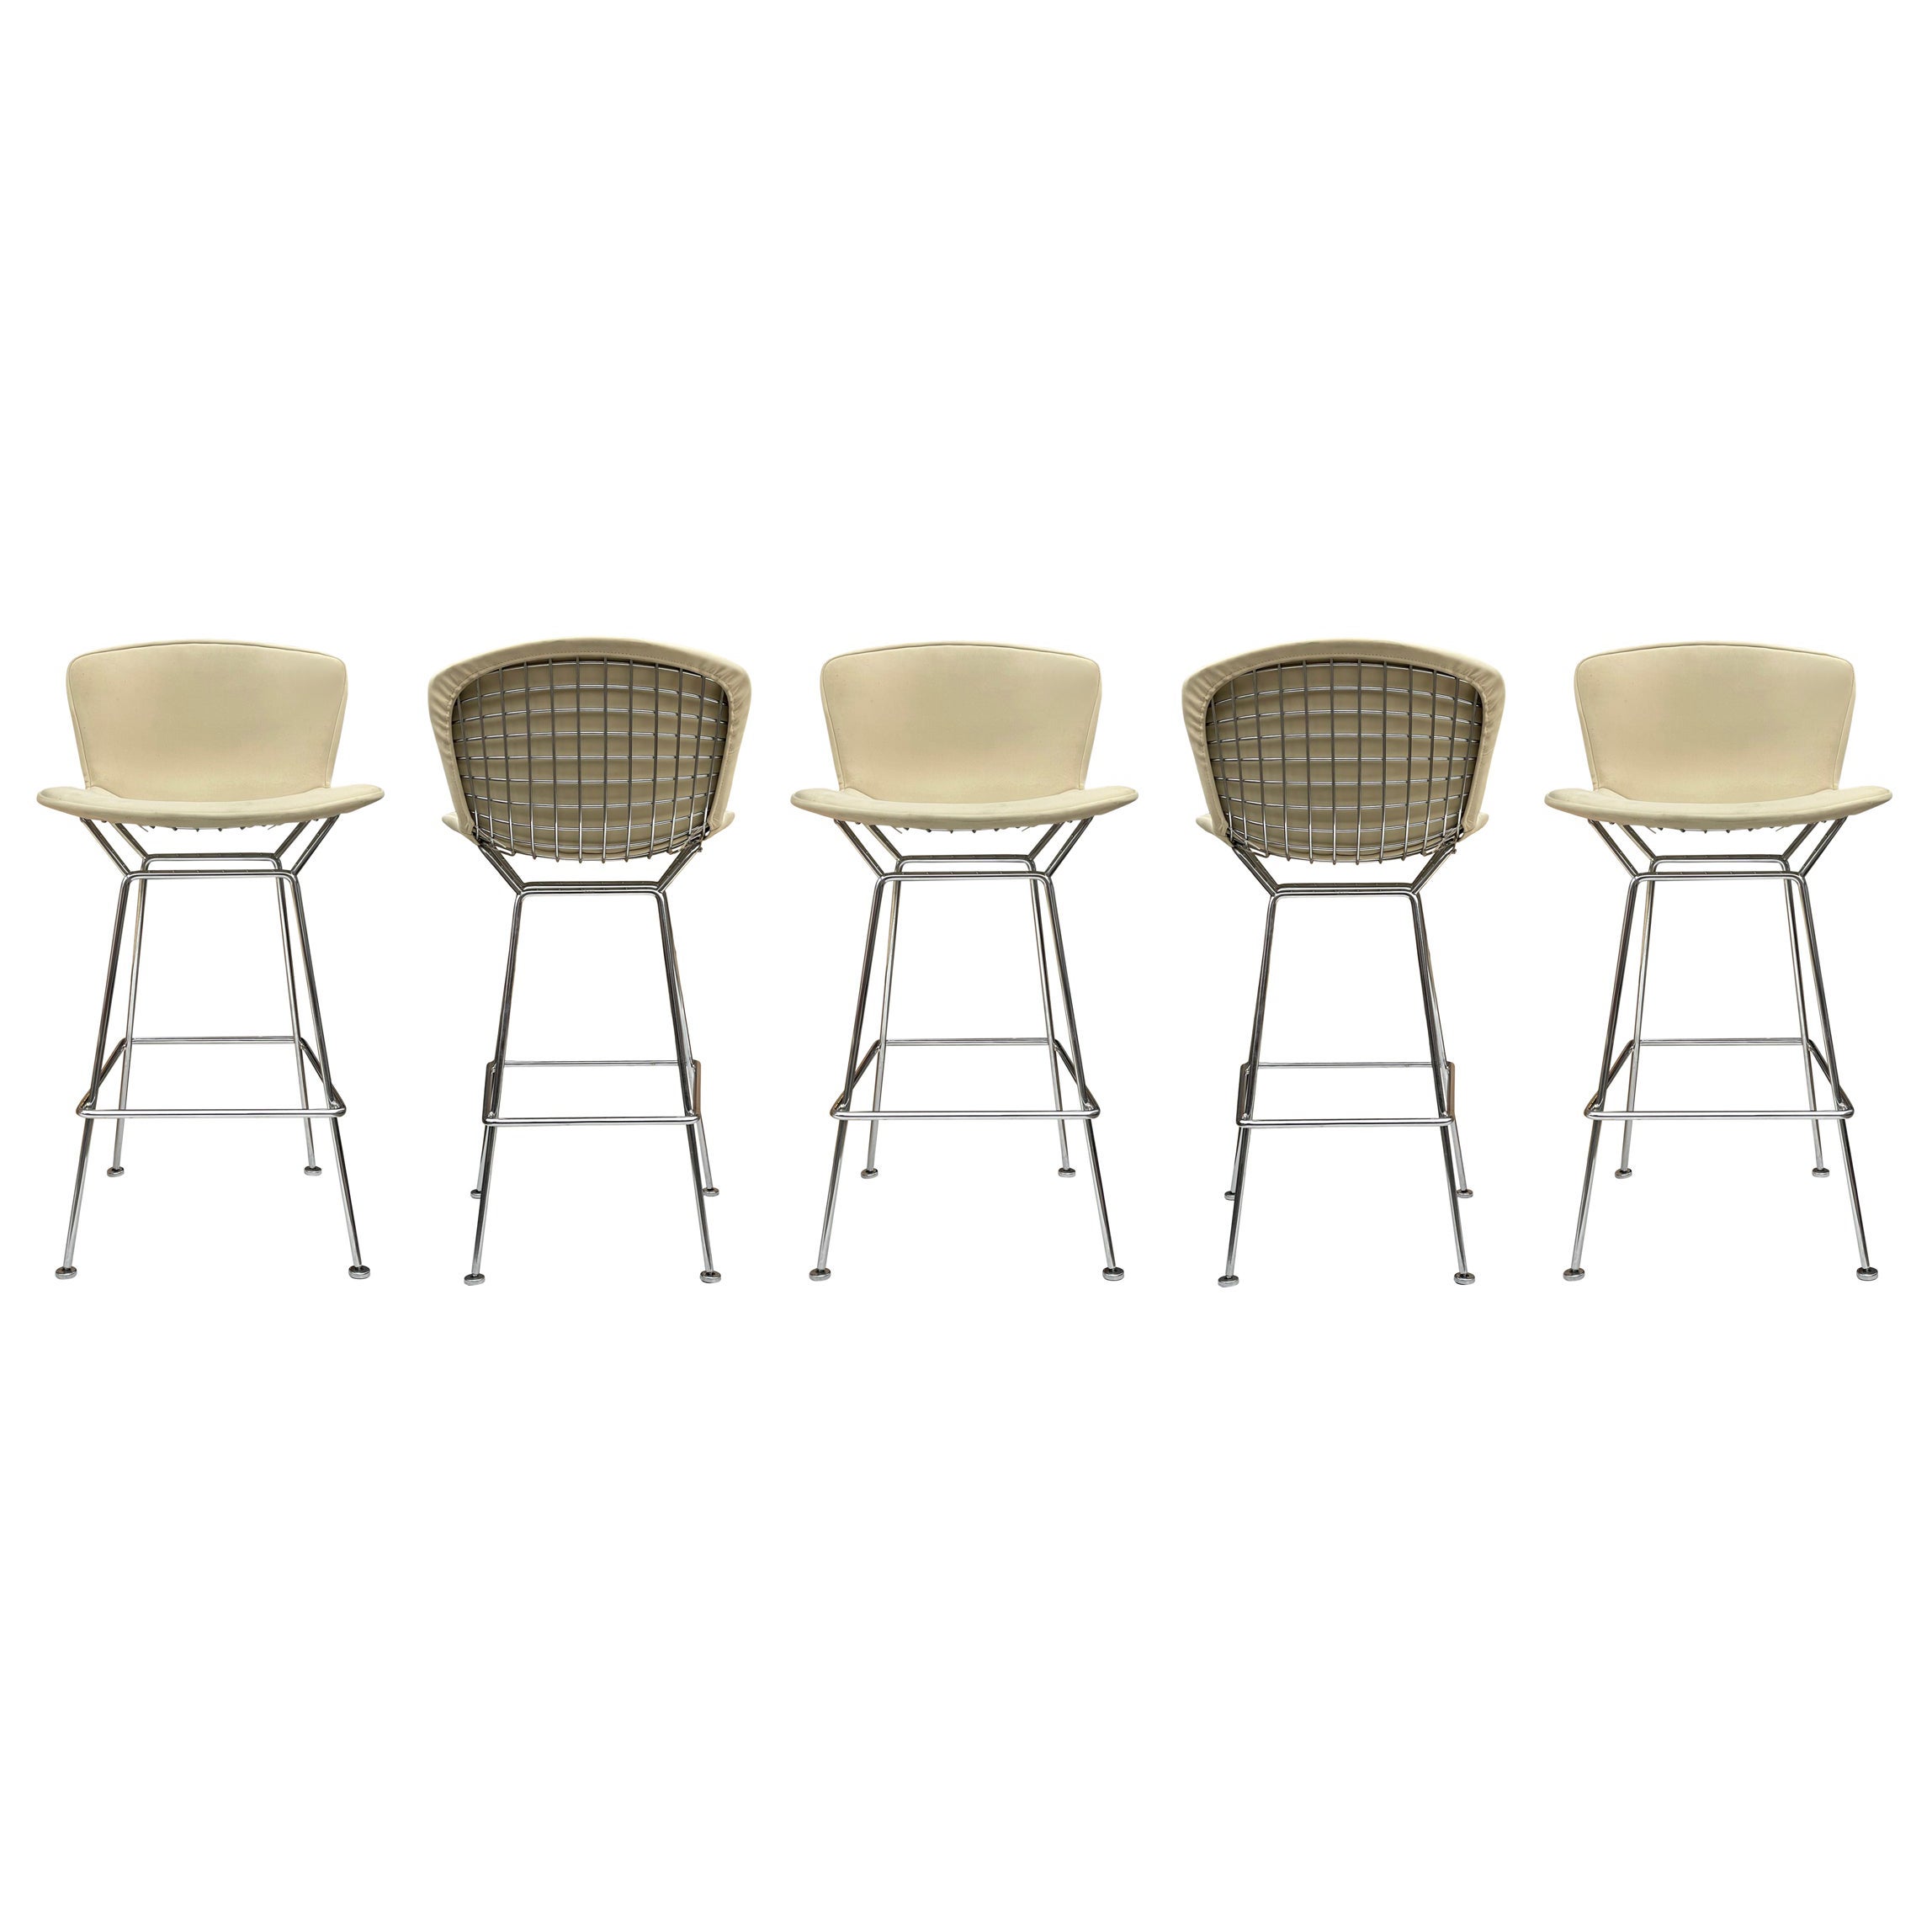 Set of Five Mid-Century Modern Harry Bertoia for Knoll Wire Bar Stools